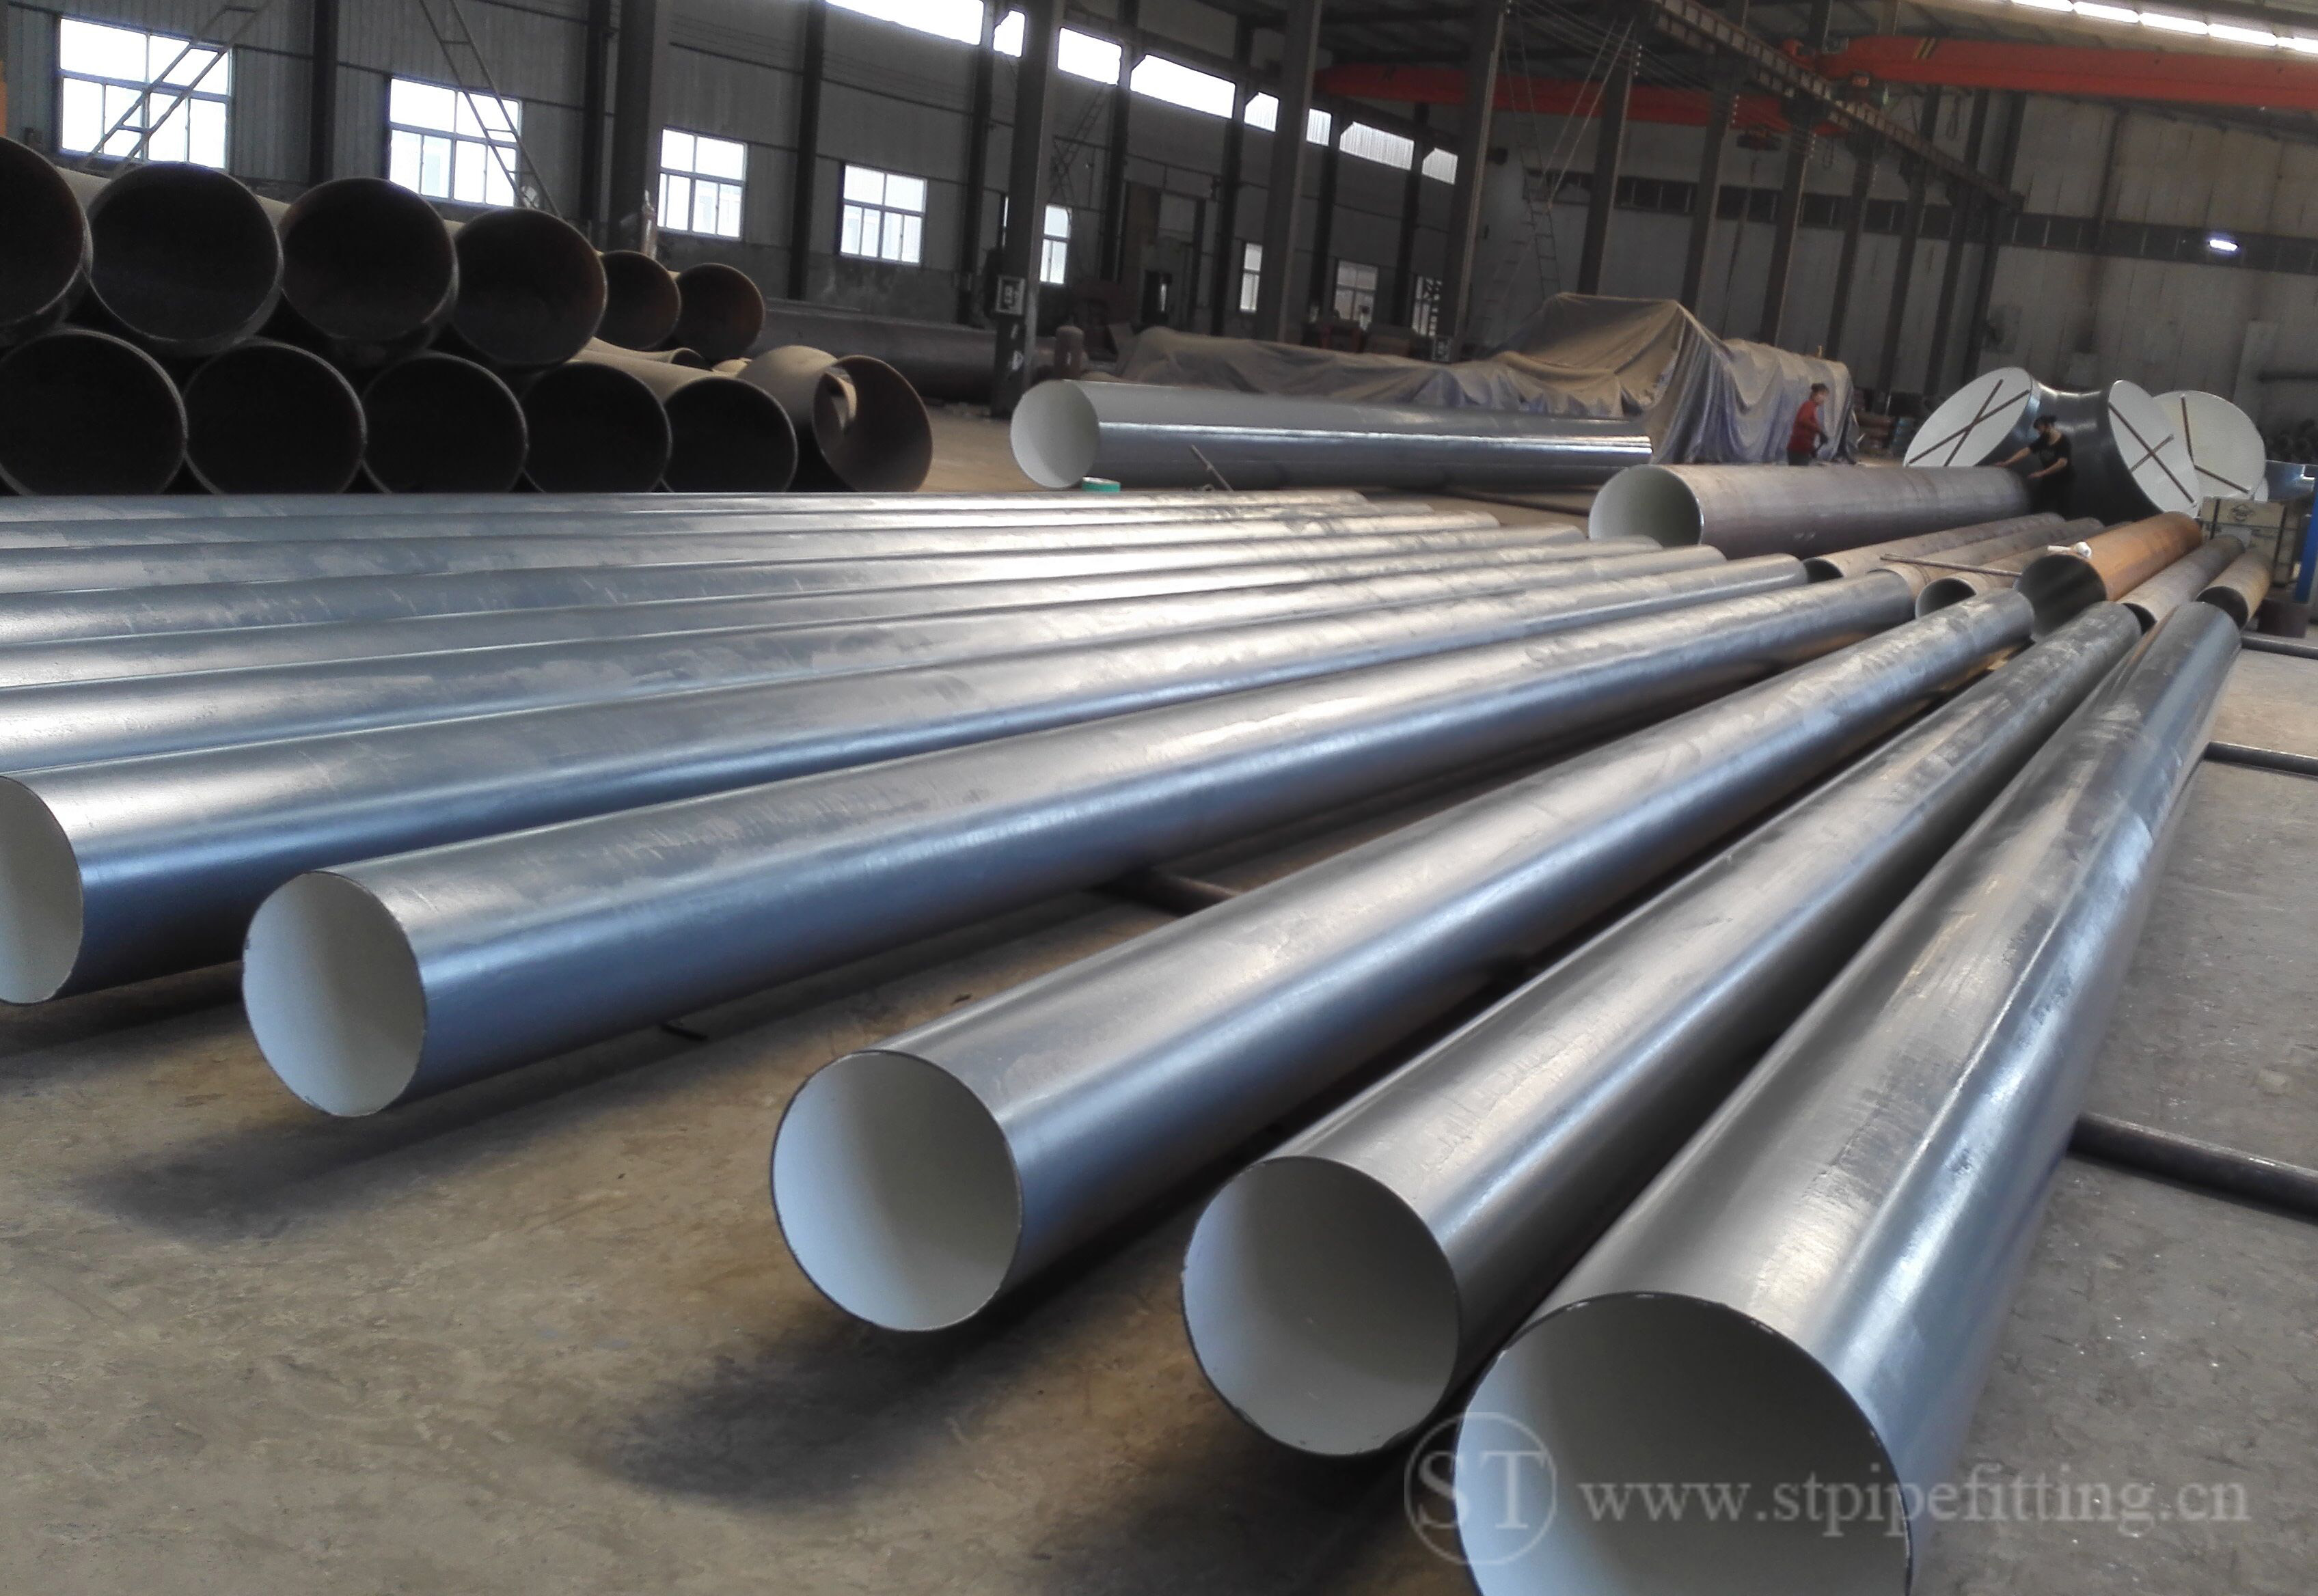 Prefabricated piping